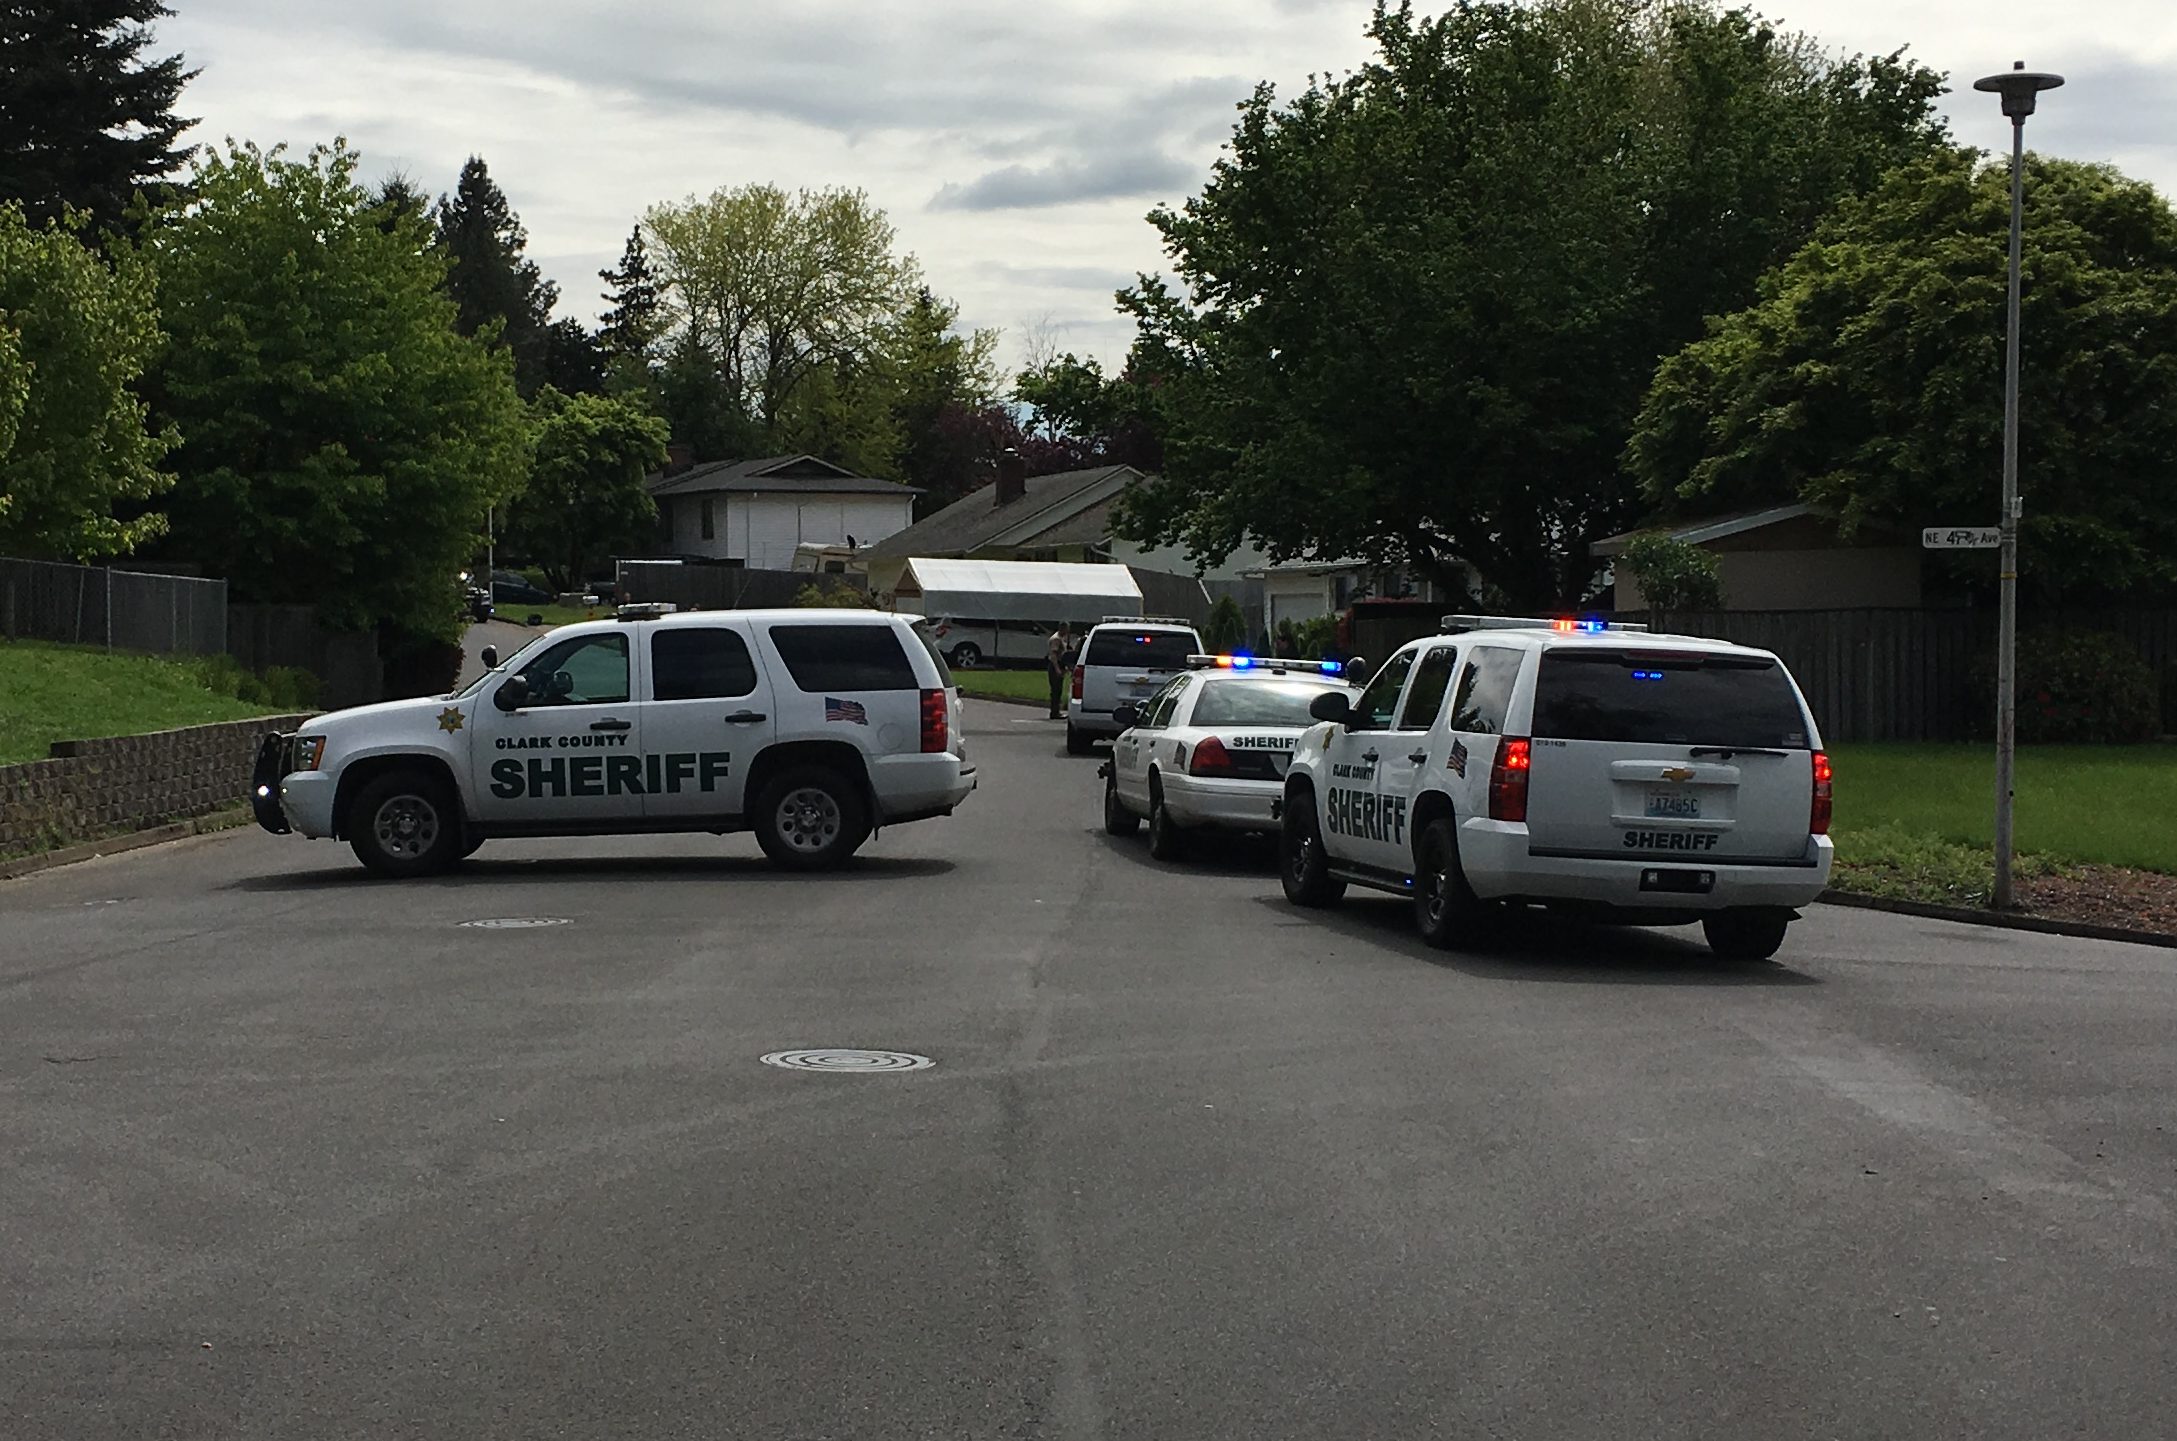 Sheriff's deputies respond to Northeast 49th Avenue in the Truman neighborhood after man with a gunshot wound arrived home there Thursday morning.